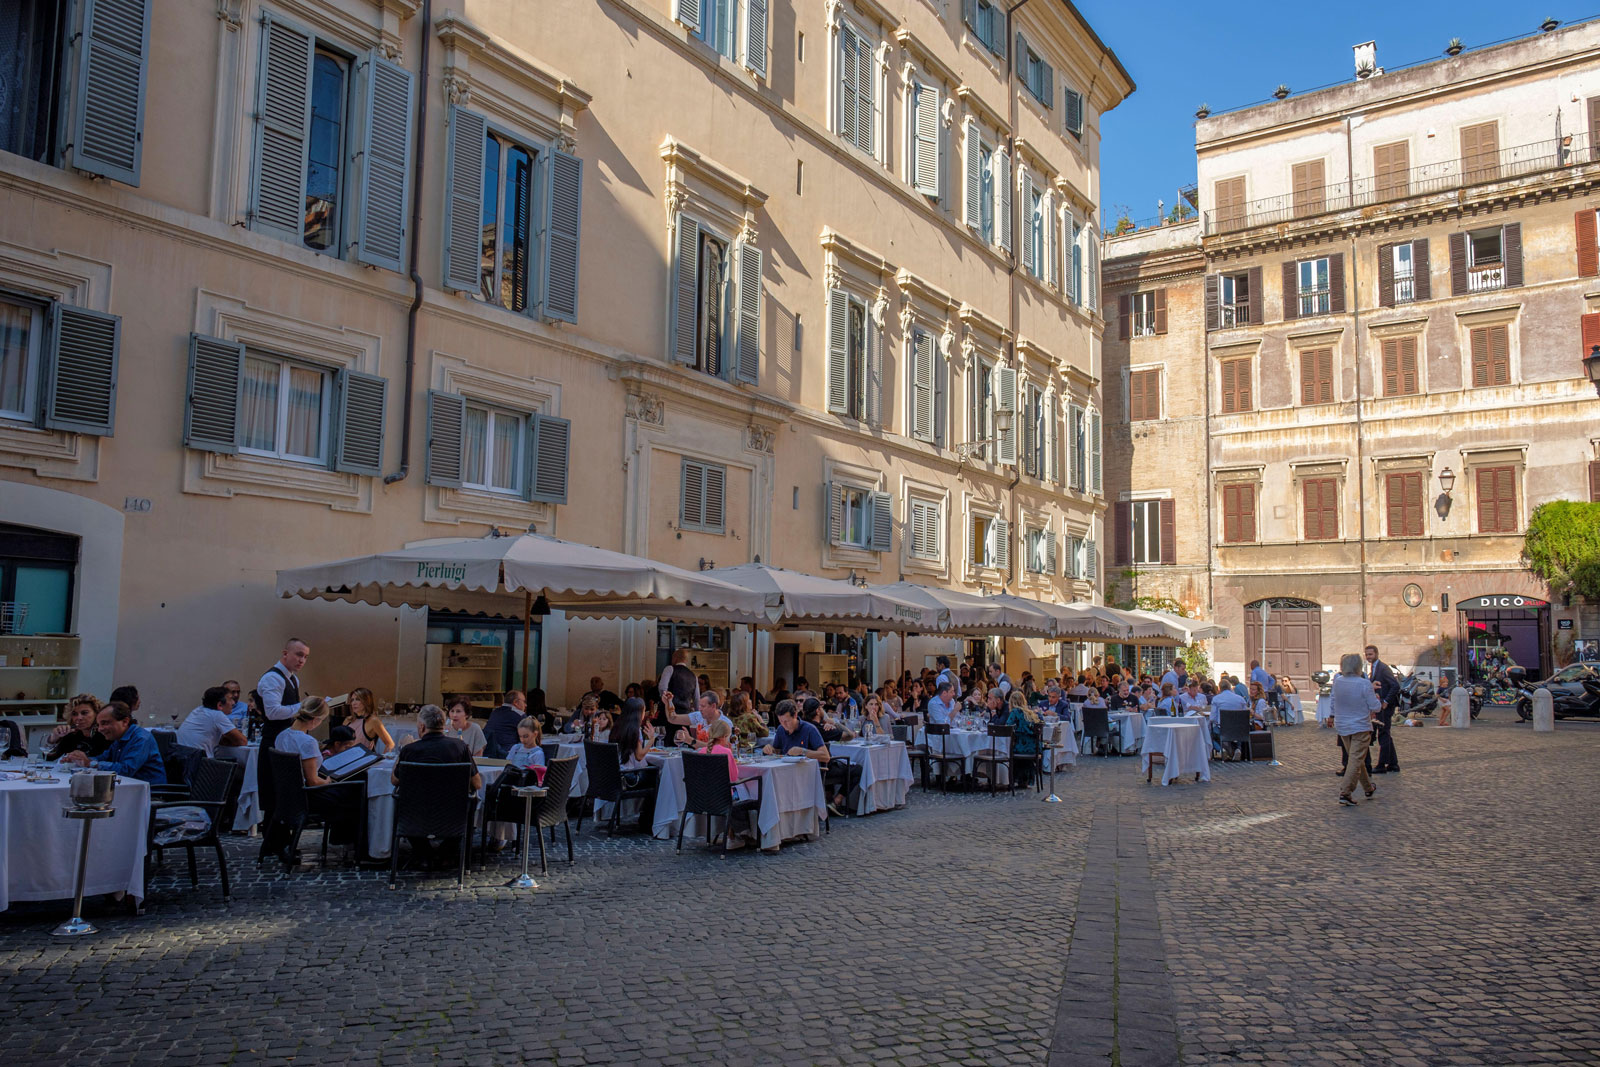 Seating outside a restaurant in a Roman Piazza.